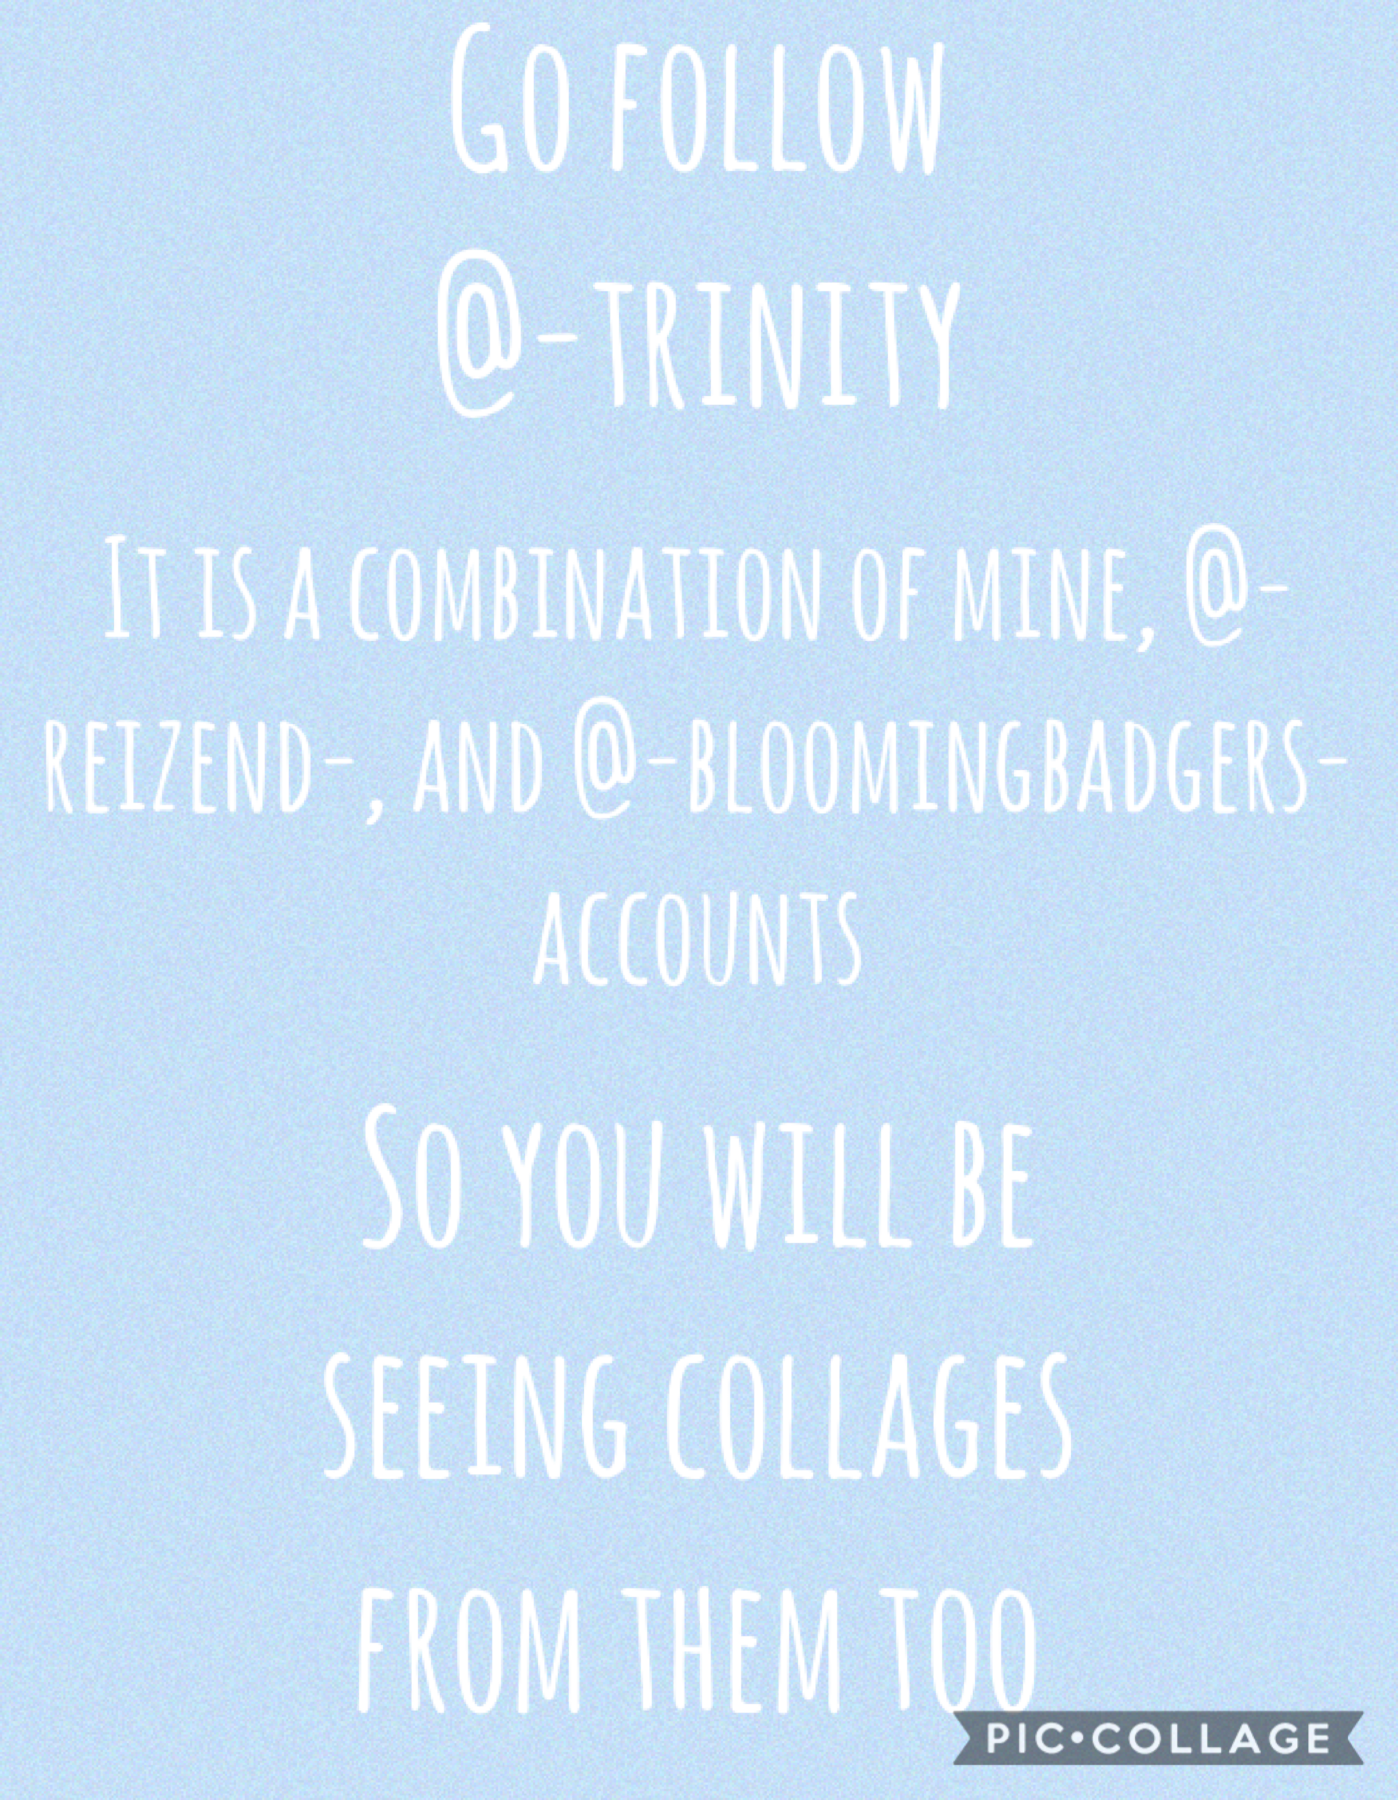 Tap
Please go follow @-trinity
Also go follow @-reizend- and   @-bloomingbadgers-